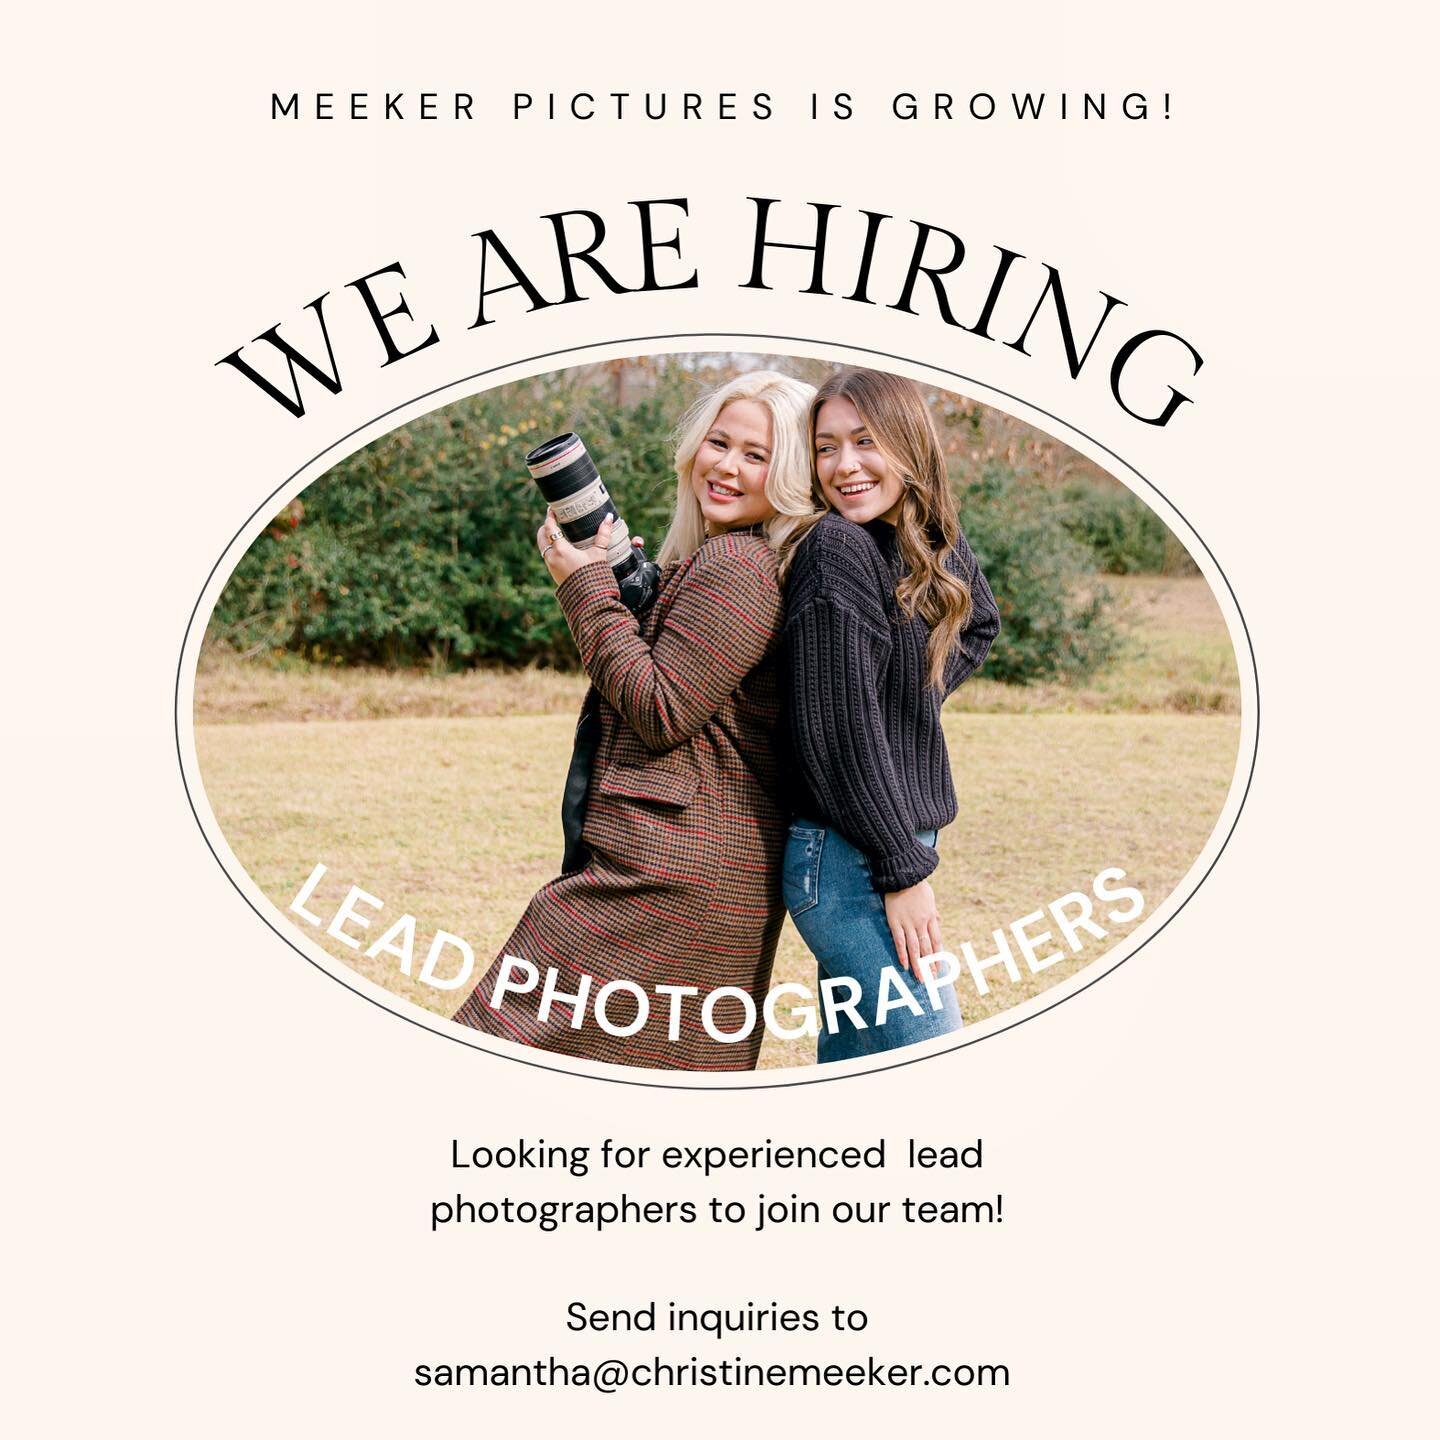 ARE YOU A COOL, FUN, CREATIVE, &amp; EXPERIENCED PHOTOGRAPHER THAT LOVES TO CAPTURE LOVE IN ALL ITS FORMS LOOKIN TO JOIN A TEAM OF COOL, FUN, CREATIVE PHOTOGRAPHERS THAT ALSO LOVE TO CAPTURE LOVE IN ALL ITS FORMS?!?!?!? If yes, we want you!!

Sorry f